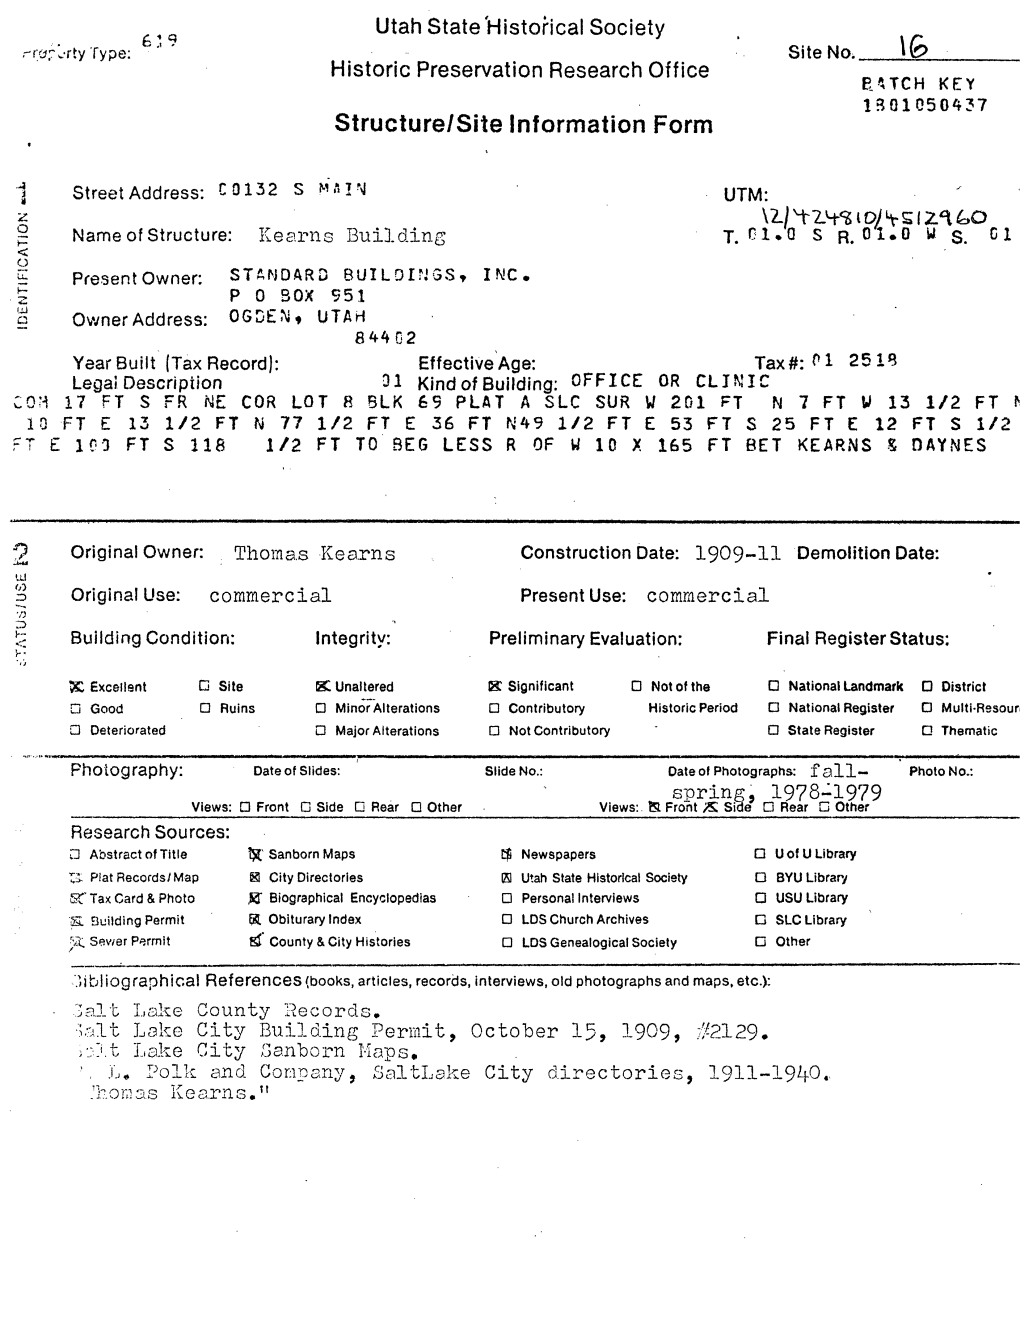 Structure/Site Information Form Spring. 1978-1979